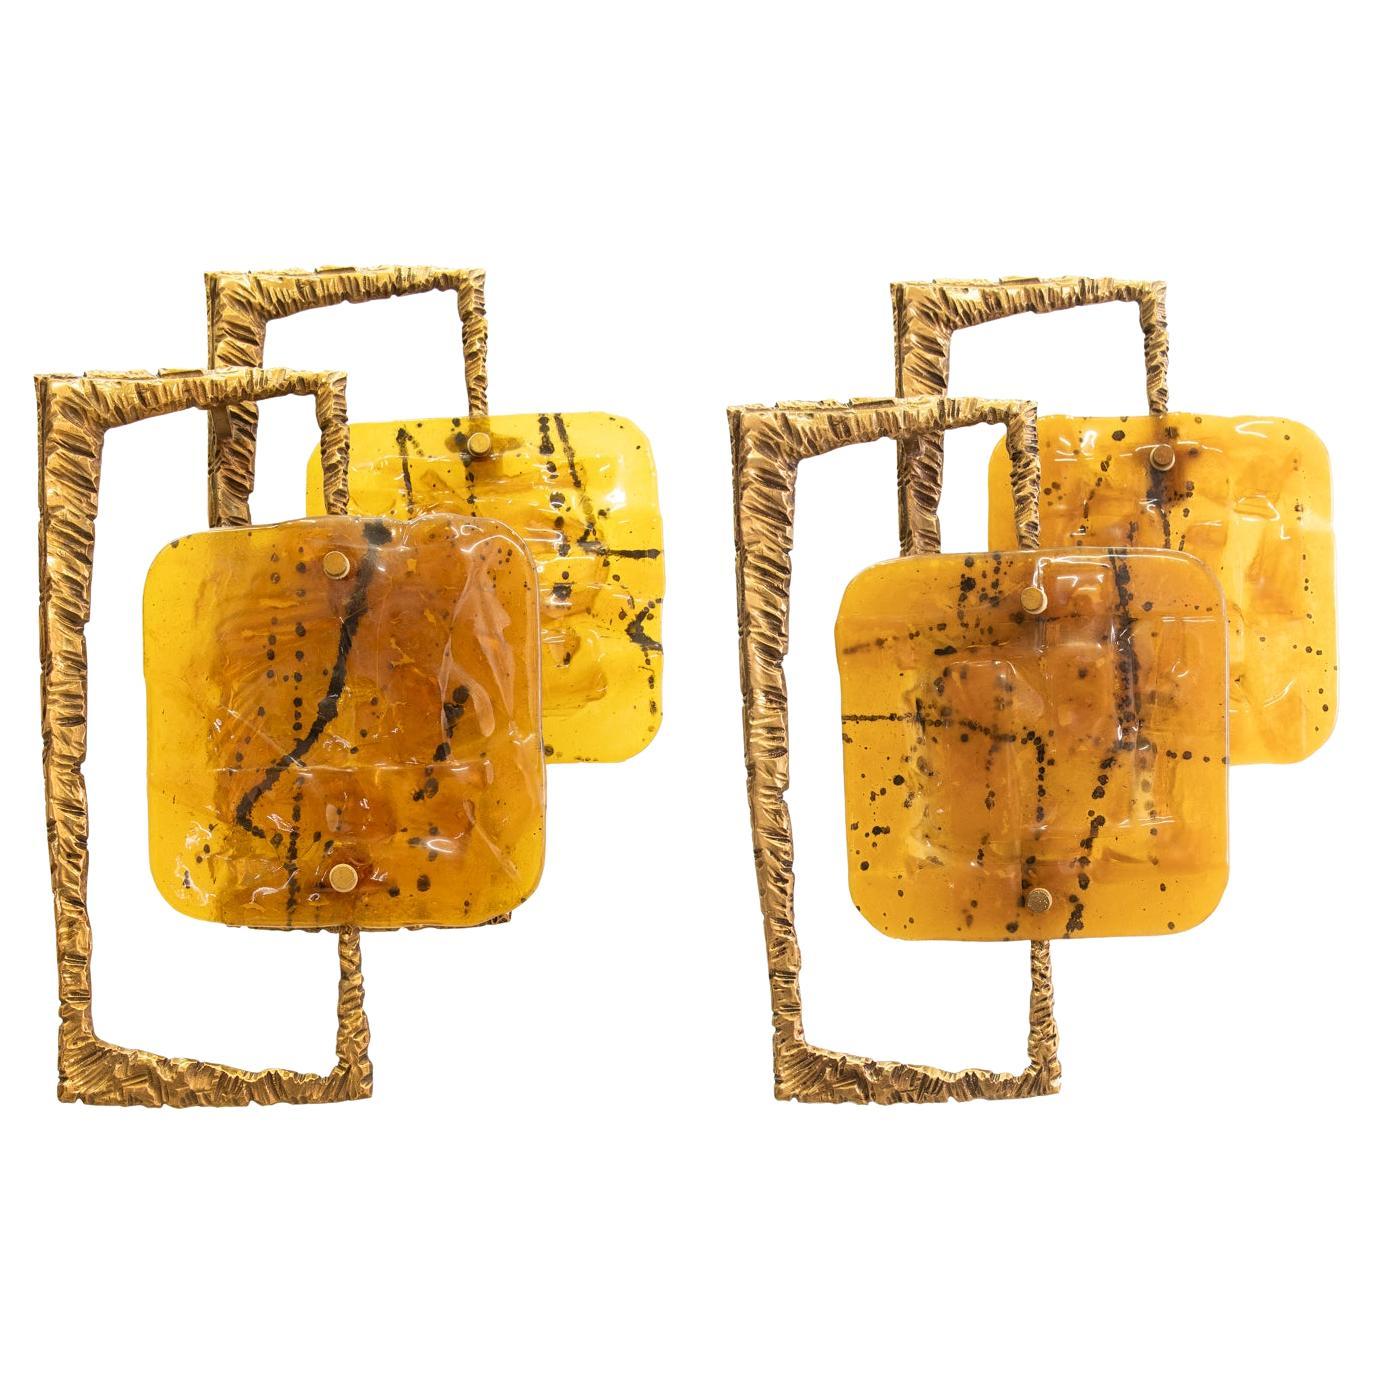 Elegant large pair of italian wall sconces made of bronze and Murano glass in the 1960s by Esperia, designed by Angelo Brotto. Gem from the time. A real eye-catcher even unlit. 

Measures: diameter/width 14” in. (36 cm), height 20.5